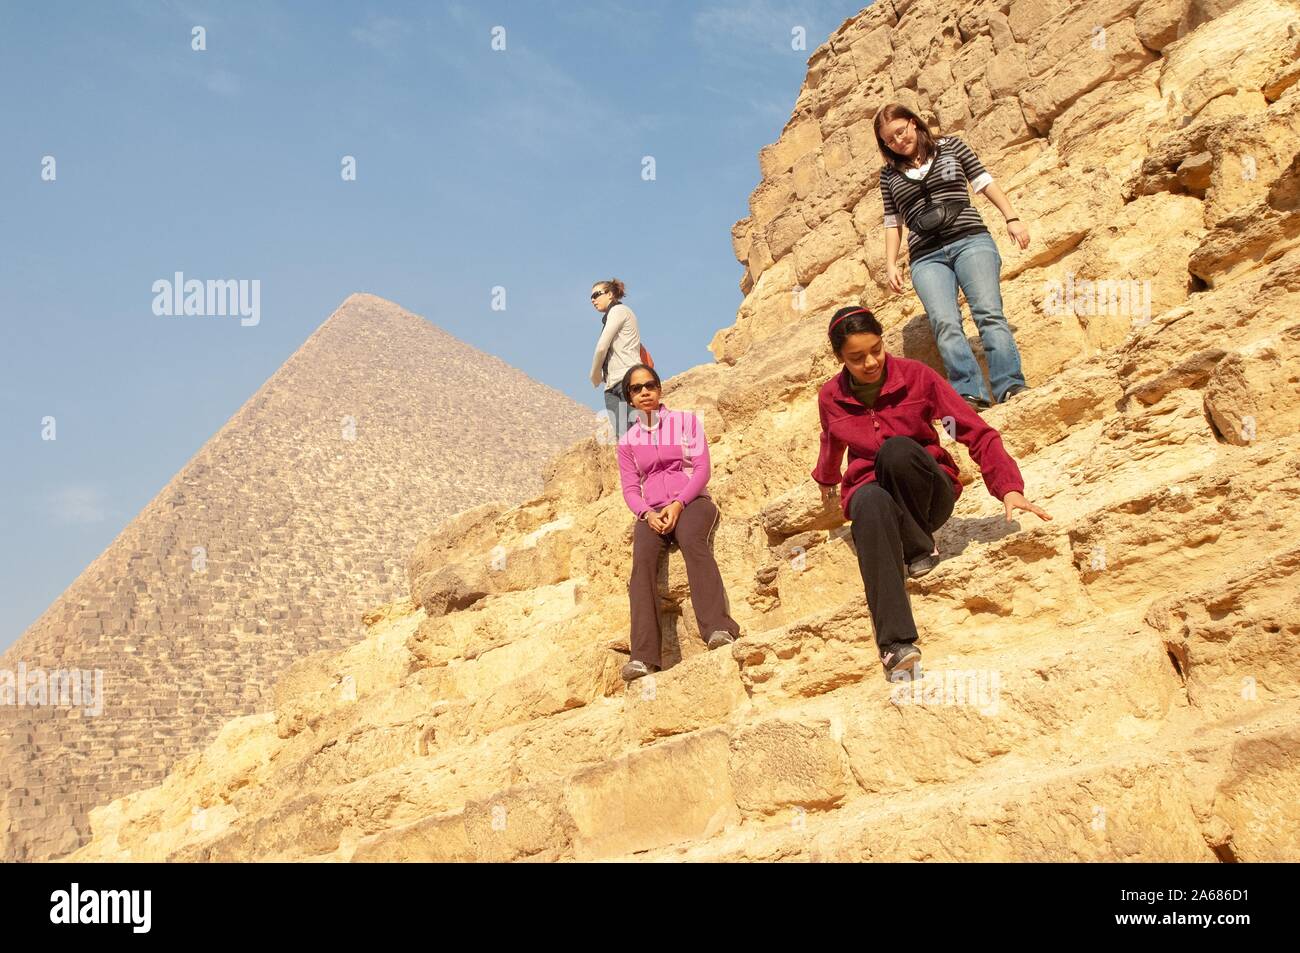 Several Johns Hopkins University students, outside on a sunny day, standing, leaning, and climbing on the blocks of a pyramid, with a second pyramid in the background, Giza, Egypt during a study abroad program, January 7, 2008. From the Homewood Photography Collection. () Stock Photo